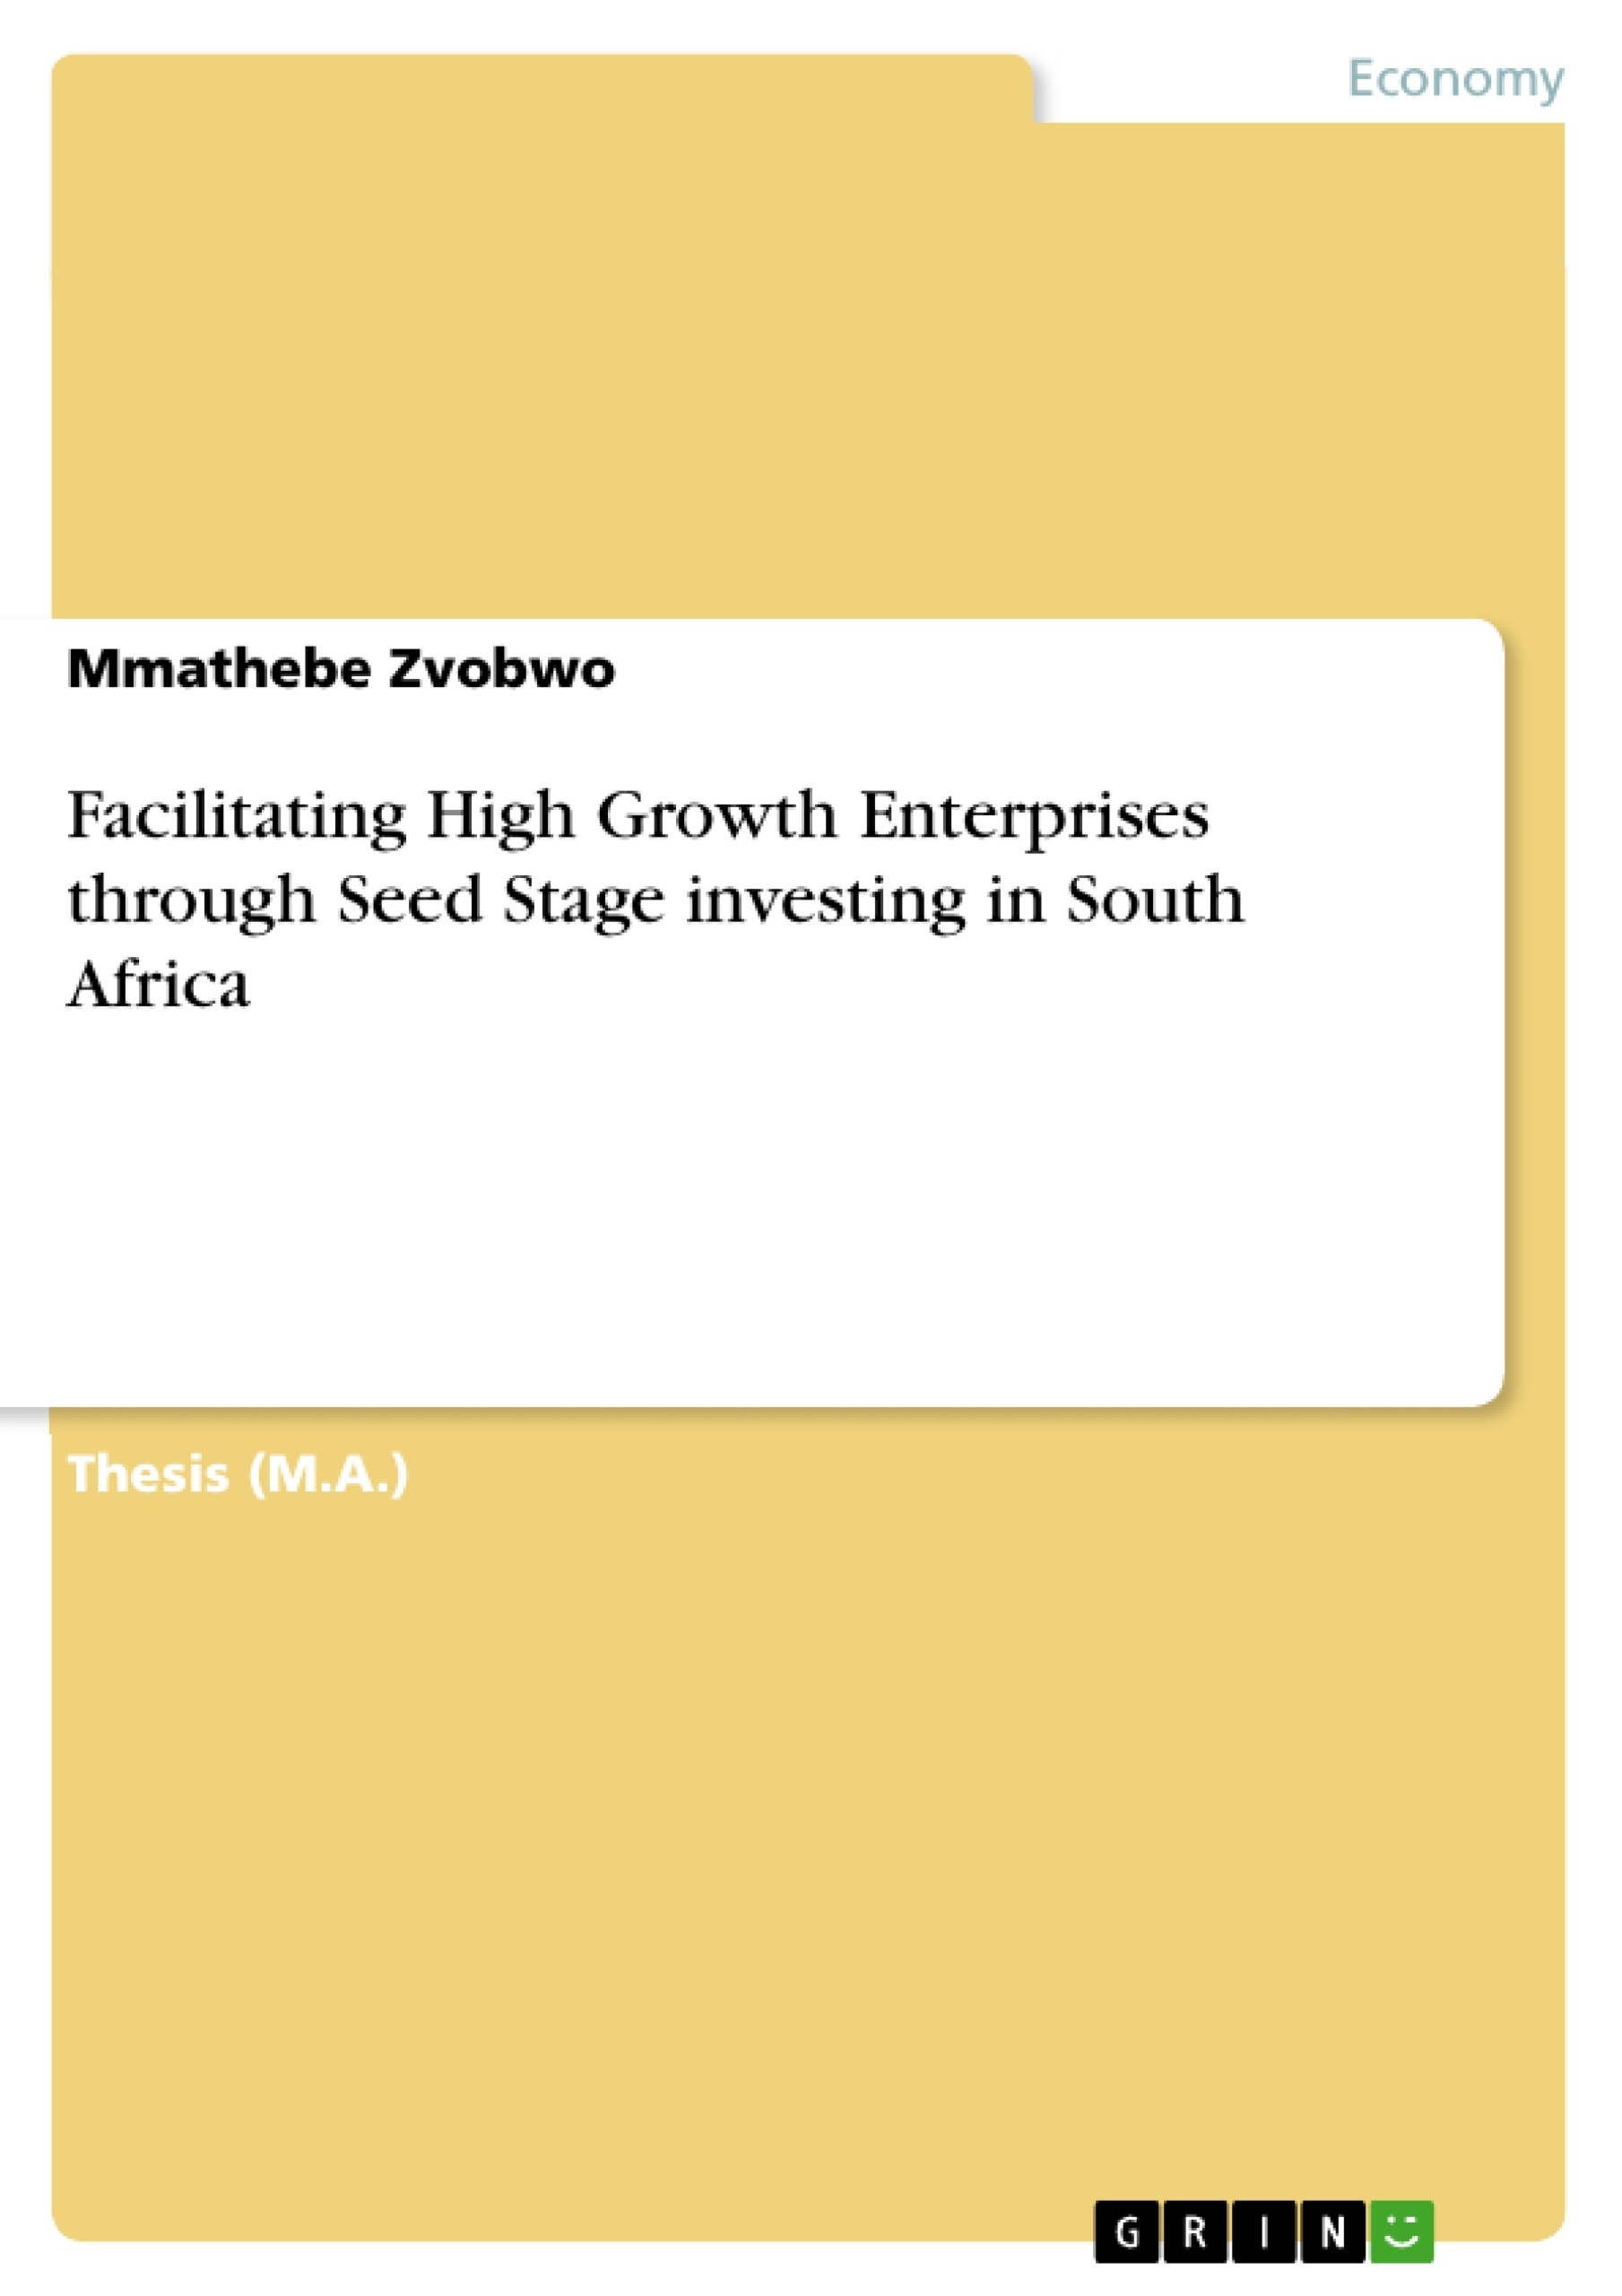 Título: Facilitating High Growth Enterprises through Seed Stage investing in South Africa